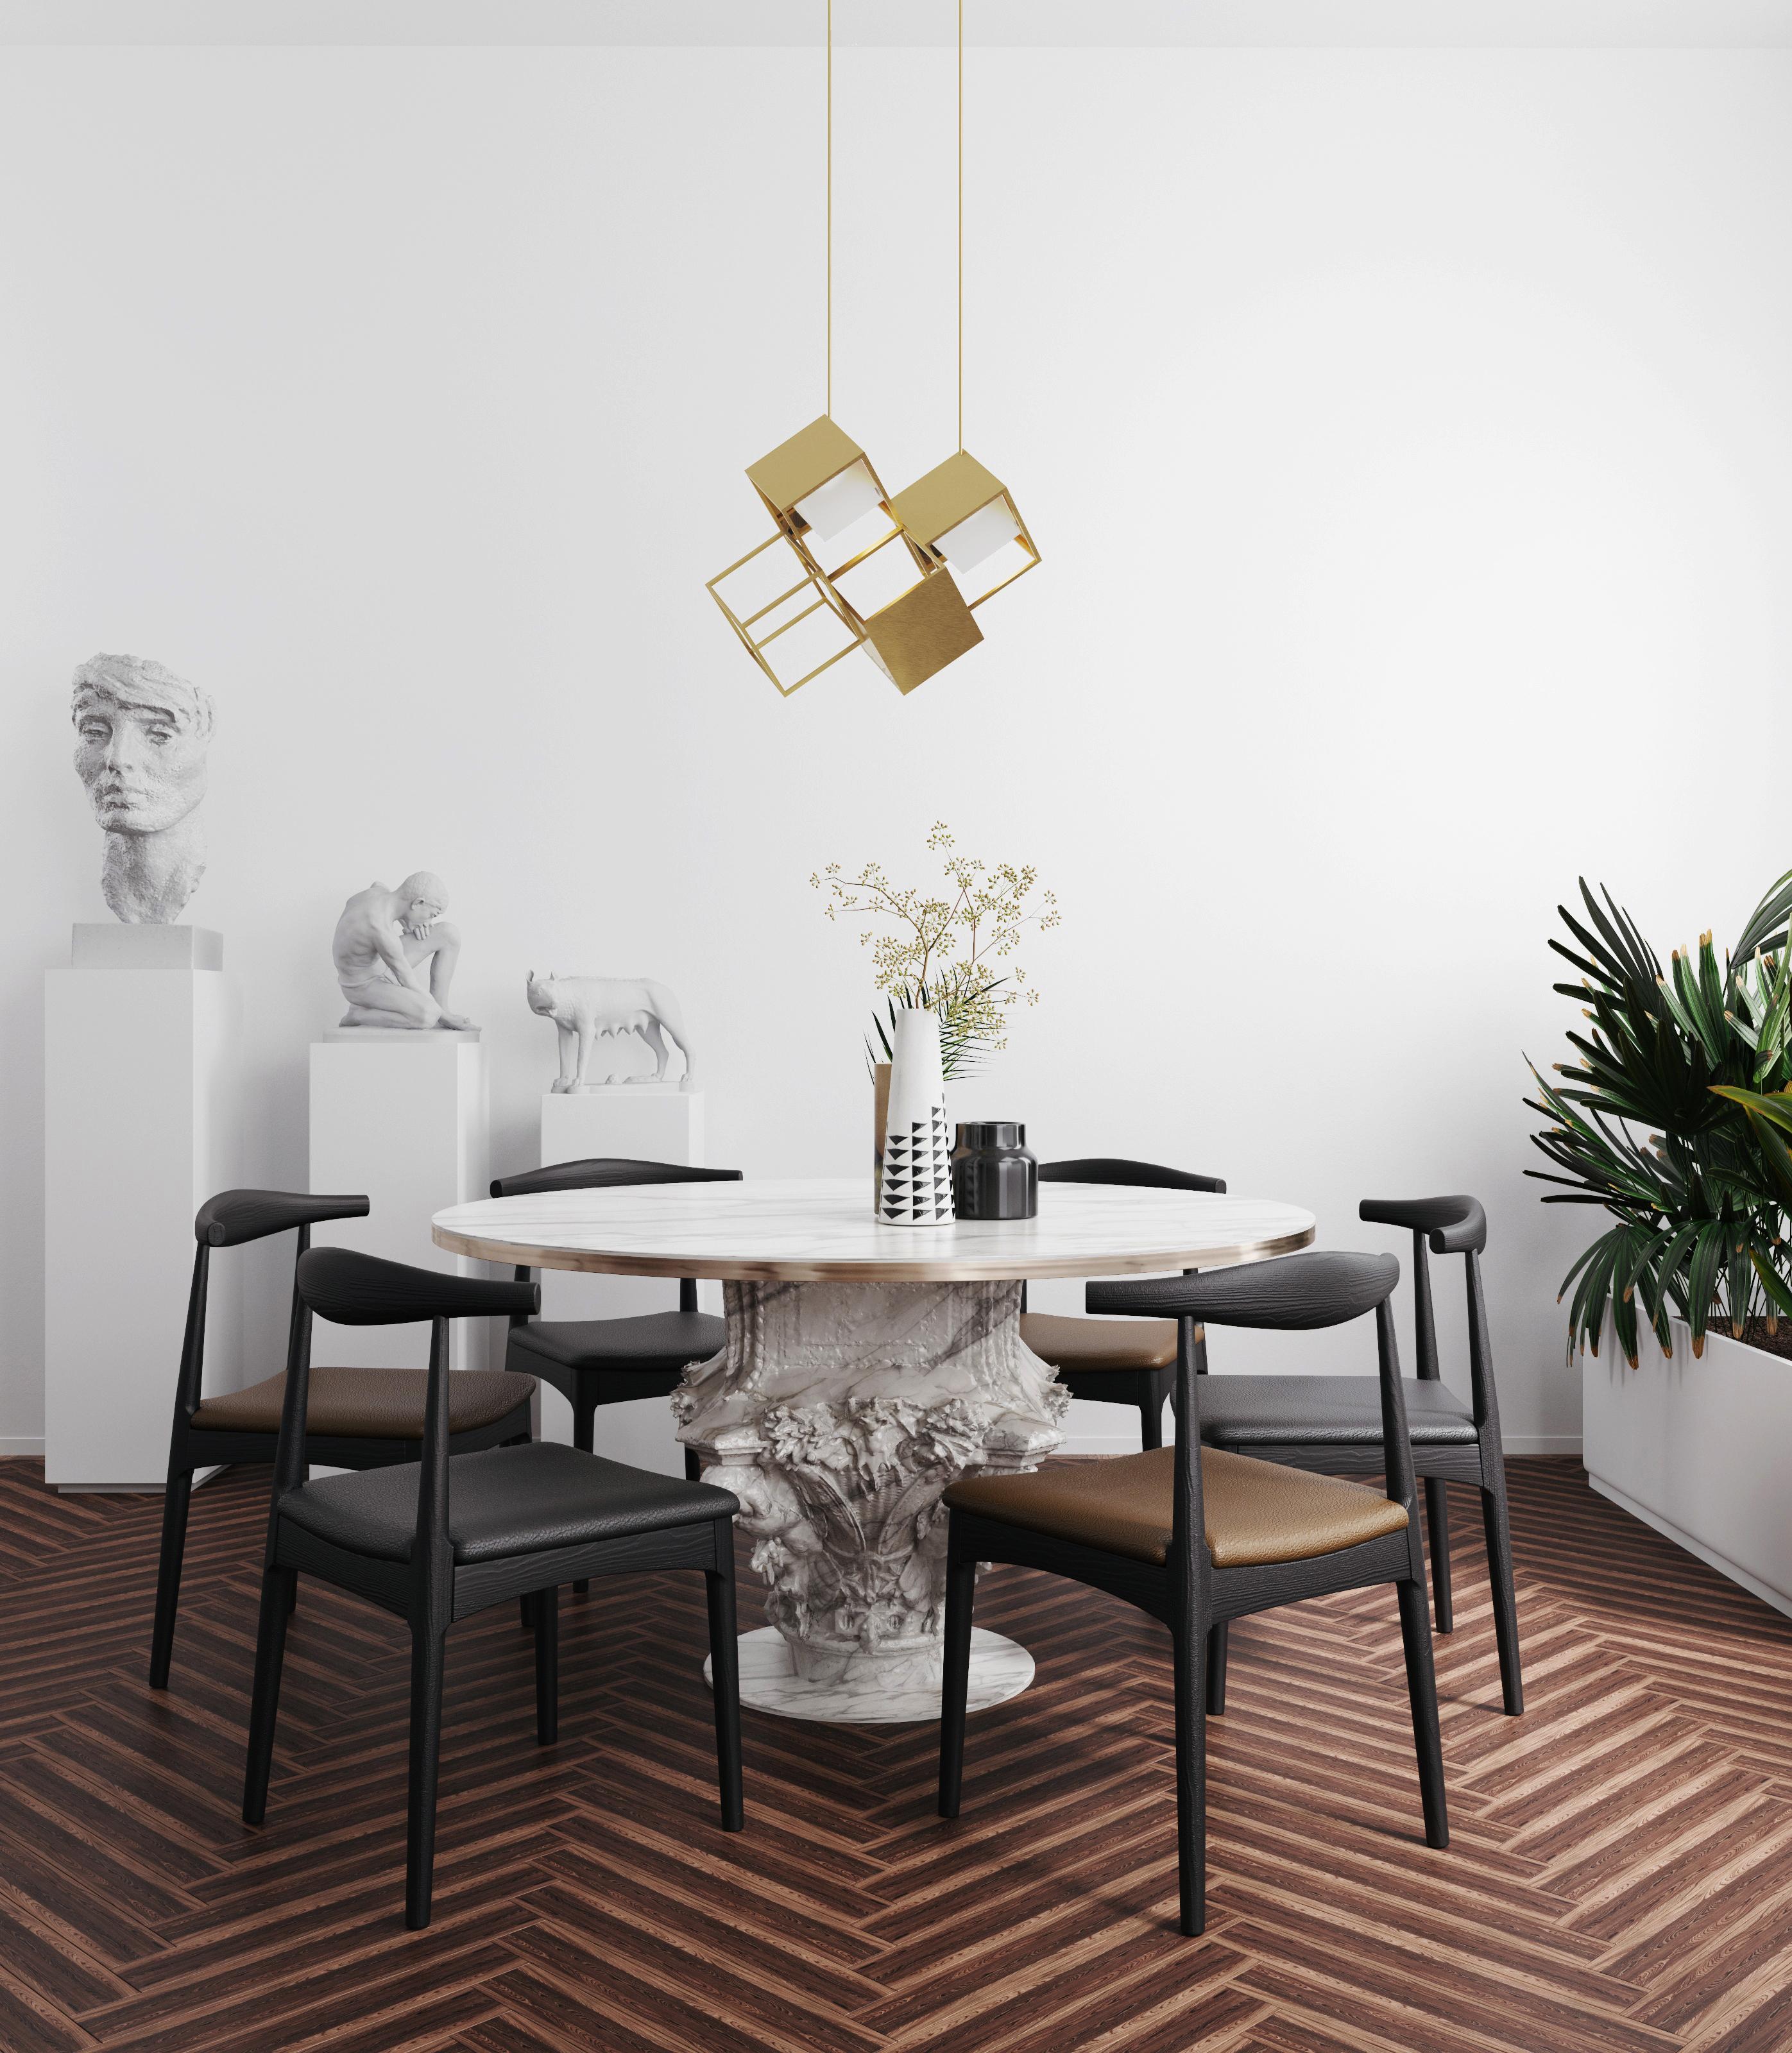 Lattis 4 Chandelier Lighting Brass by Diaphan Studio, REP by Tuleste Factory For Sale 3